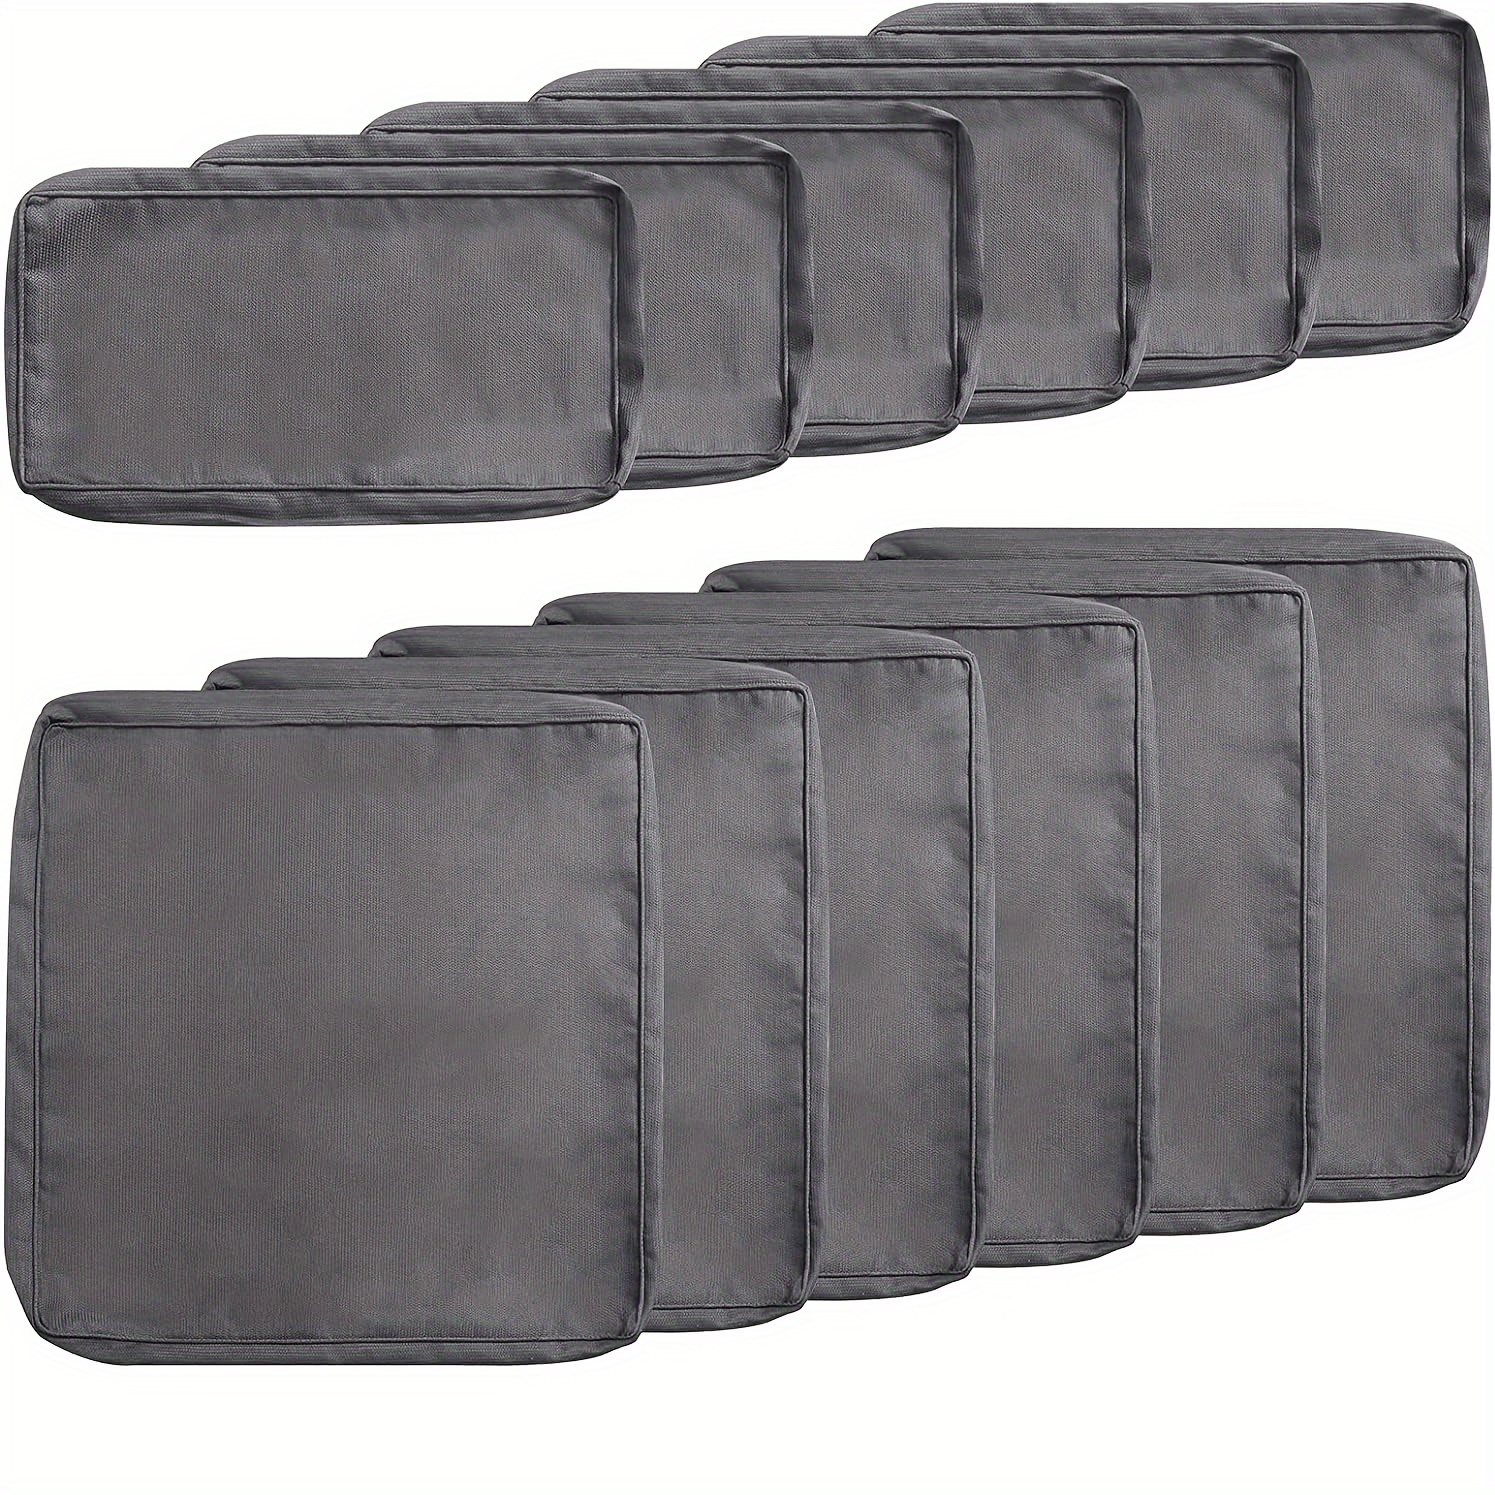 

12 Pieces Patio Seat Cushion Covers Replacement, Washable Outdoor Furniture Cushion Slipcovers (6 Seat Cushion Covers And 6 Backrest Pillow Covers) With Zipper For Patio Sofa, Couch - Grey